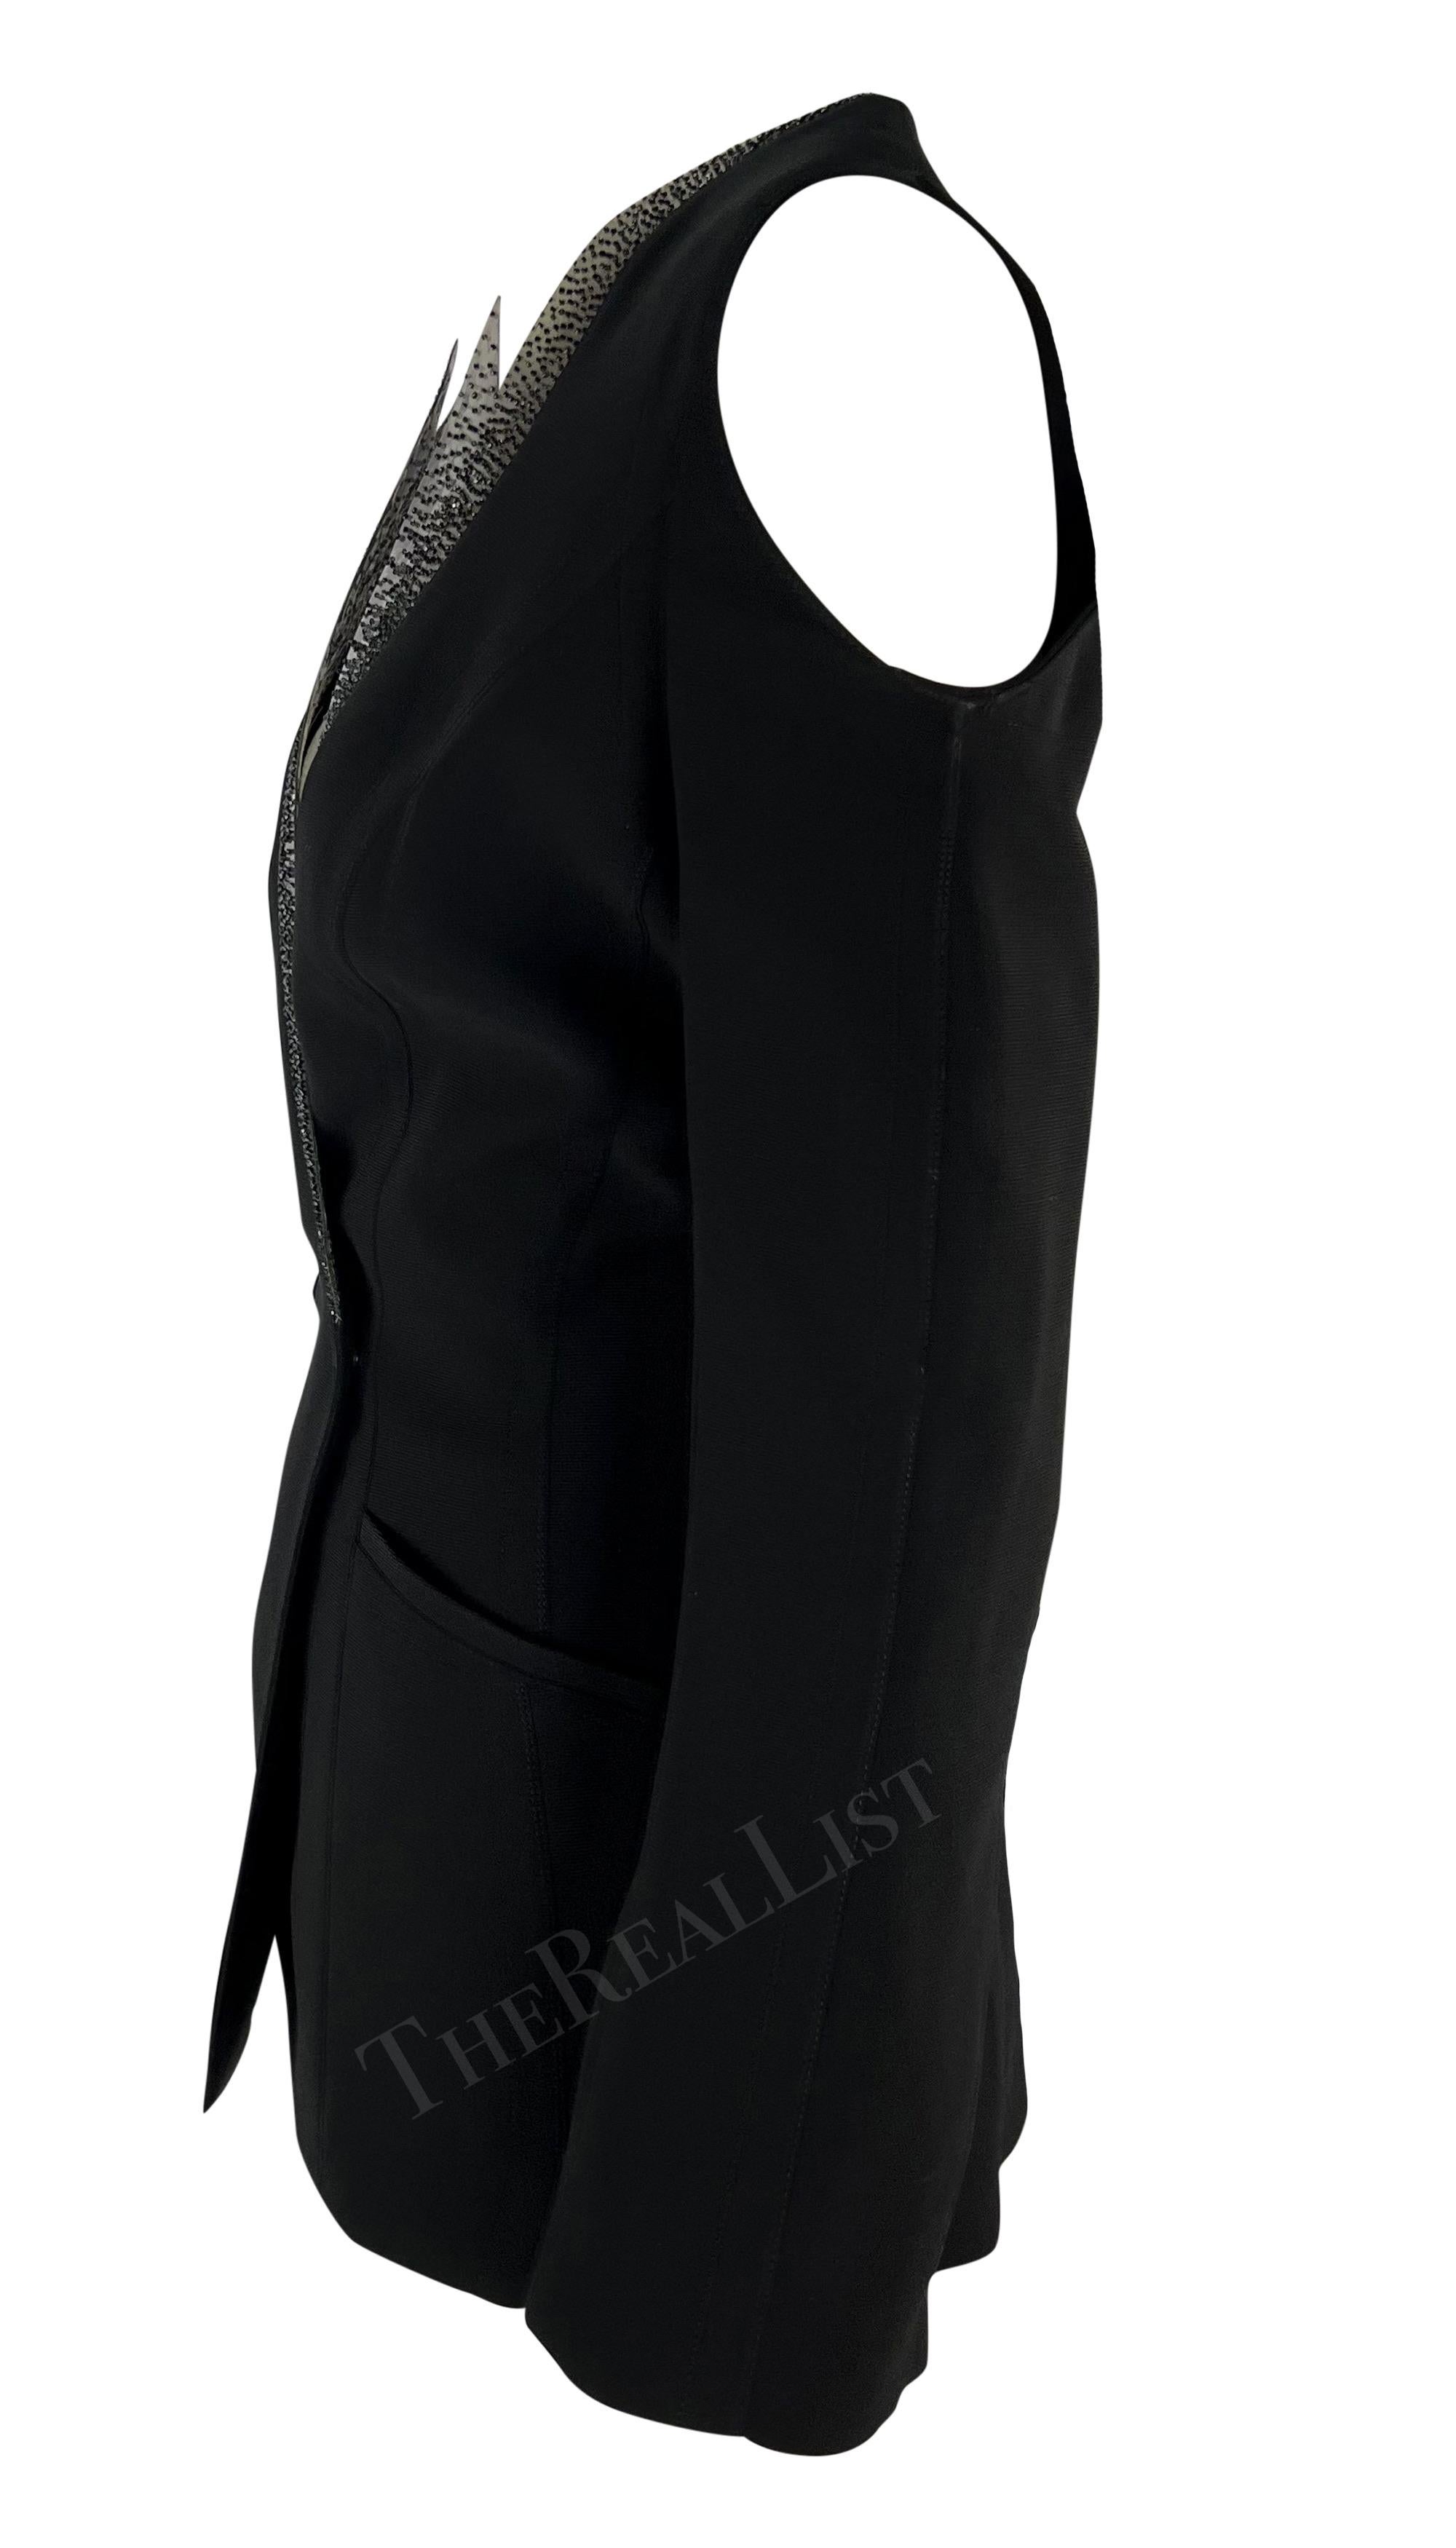 S/S 2001 Thierry Mugler Runway Beaded PVC Cutout Black Plunging Blazer For Sale 3